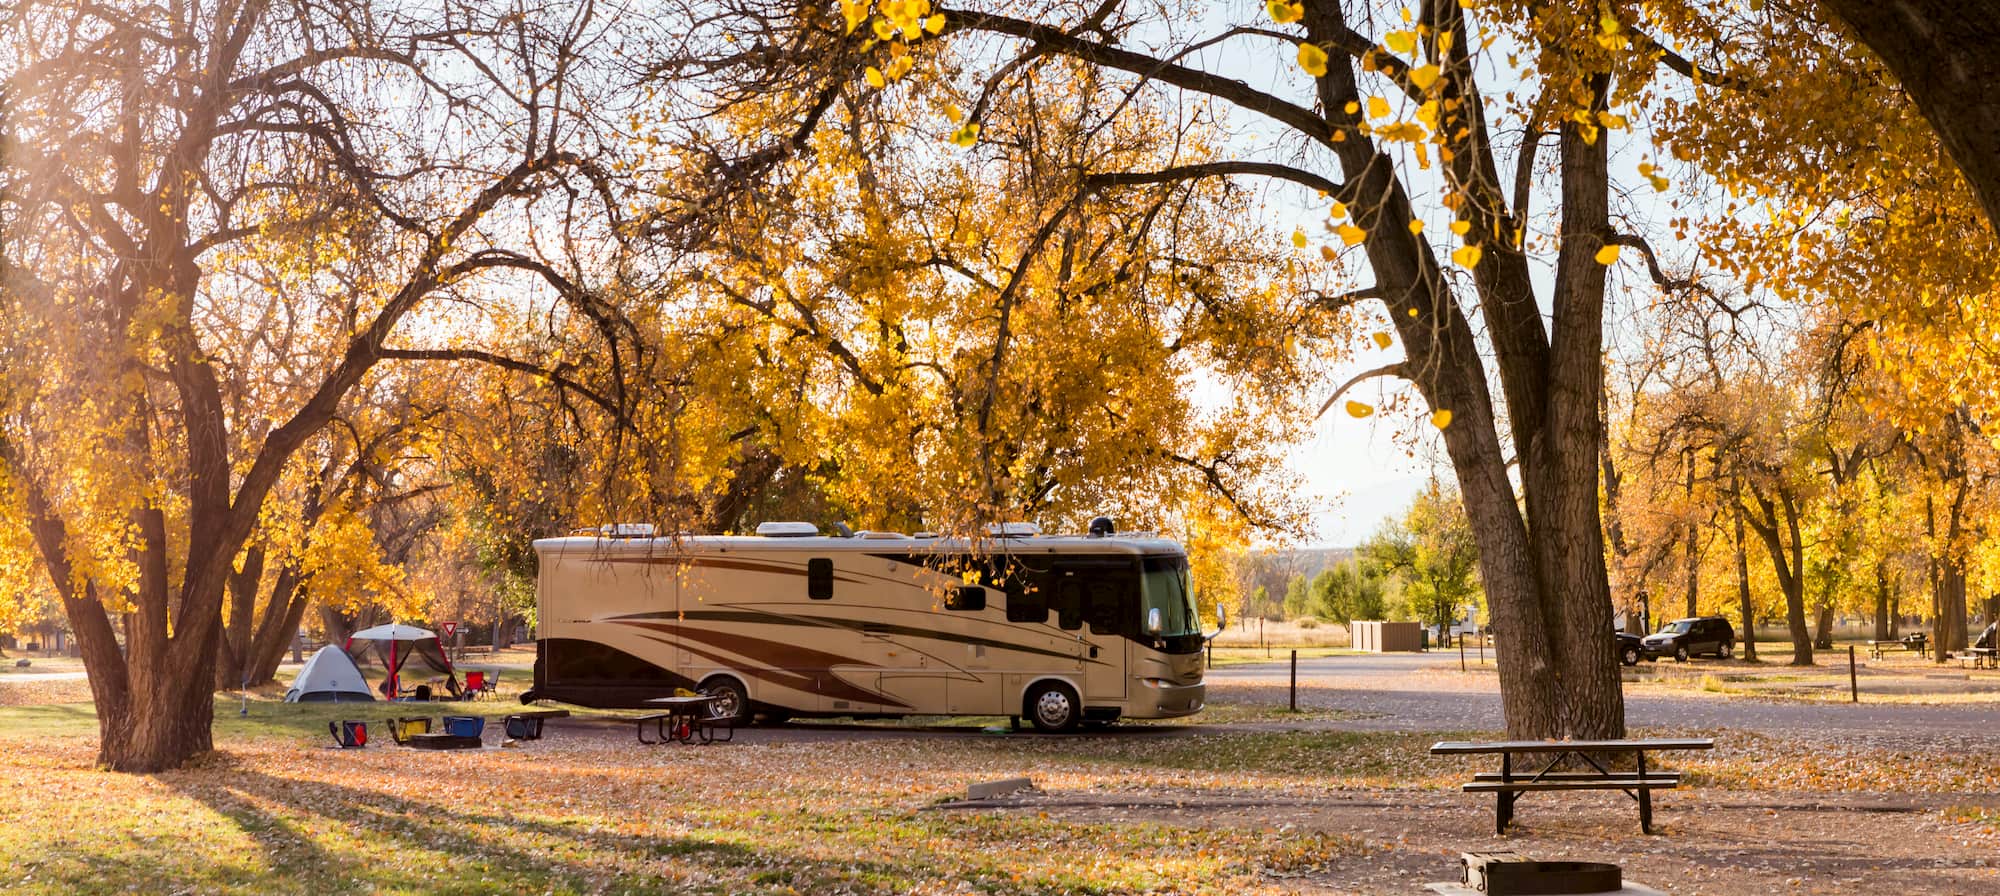 The 7 Best RV Parks For RV Camping in Colorado